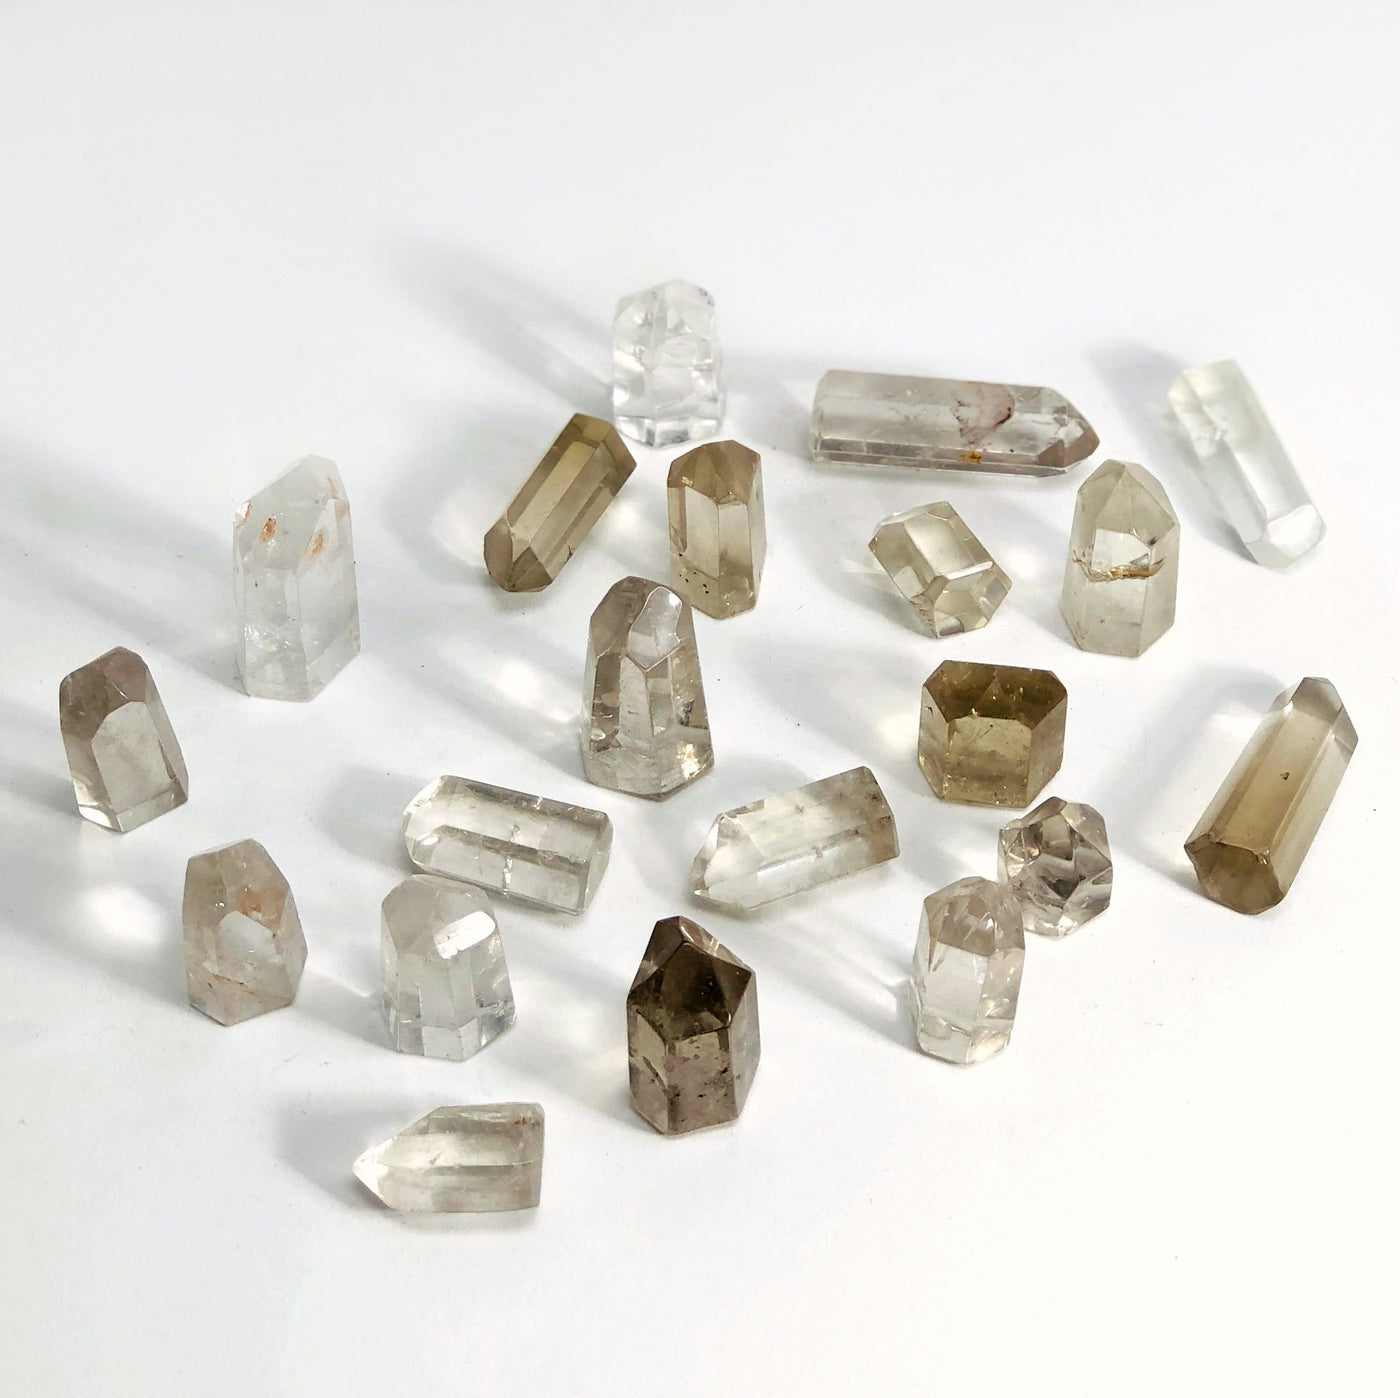 Crystal Quartz Polished Points spread out showing range of stock available